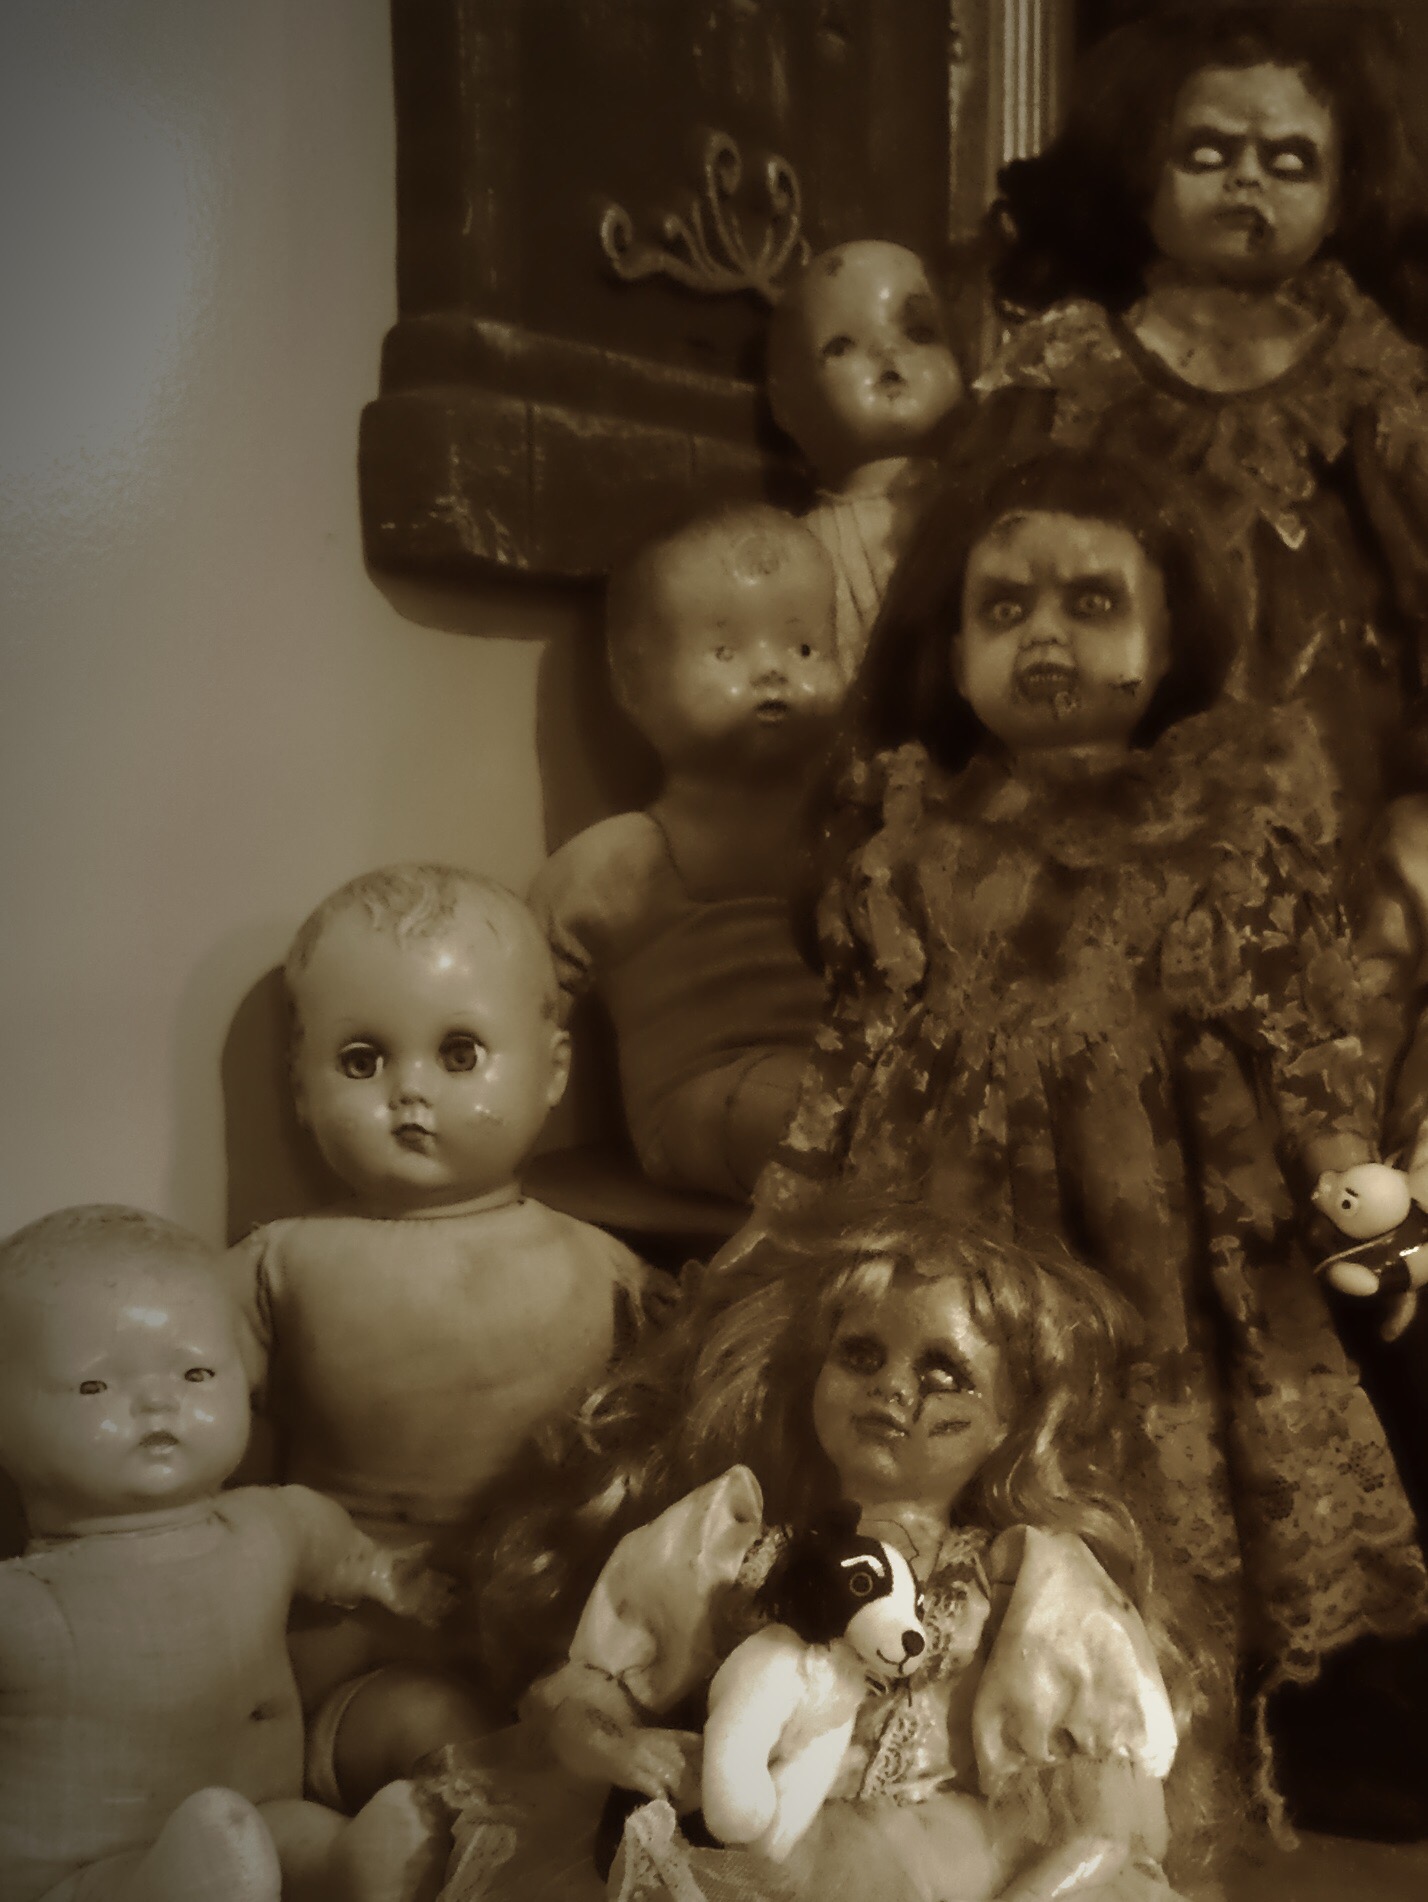 Just your average, run of the mill, typical old dolls